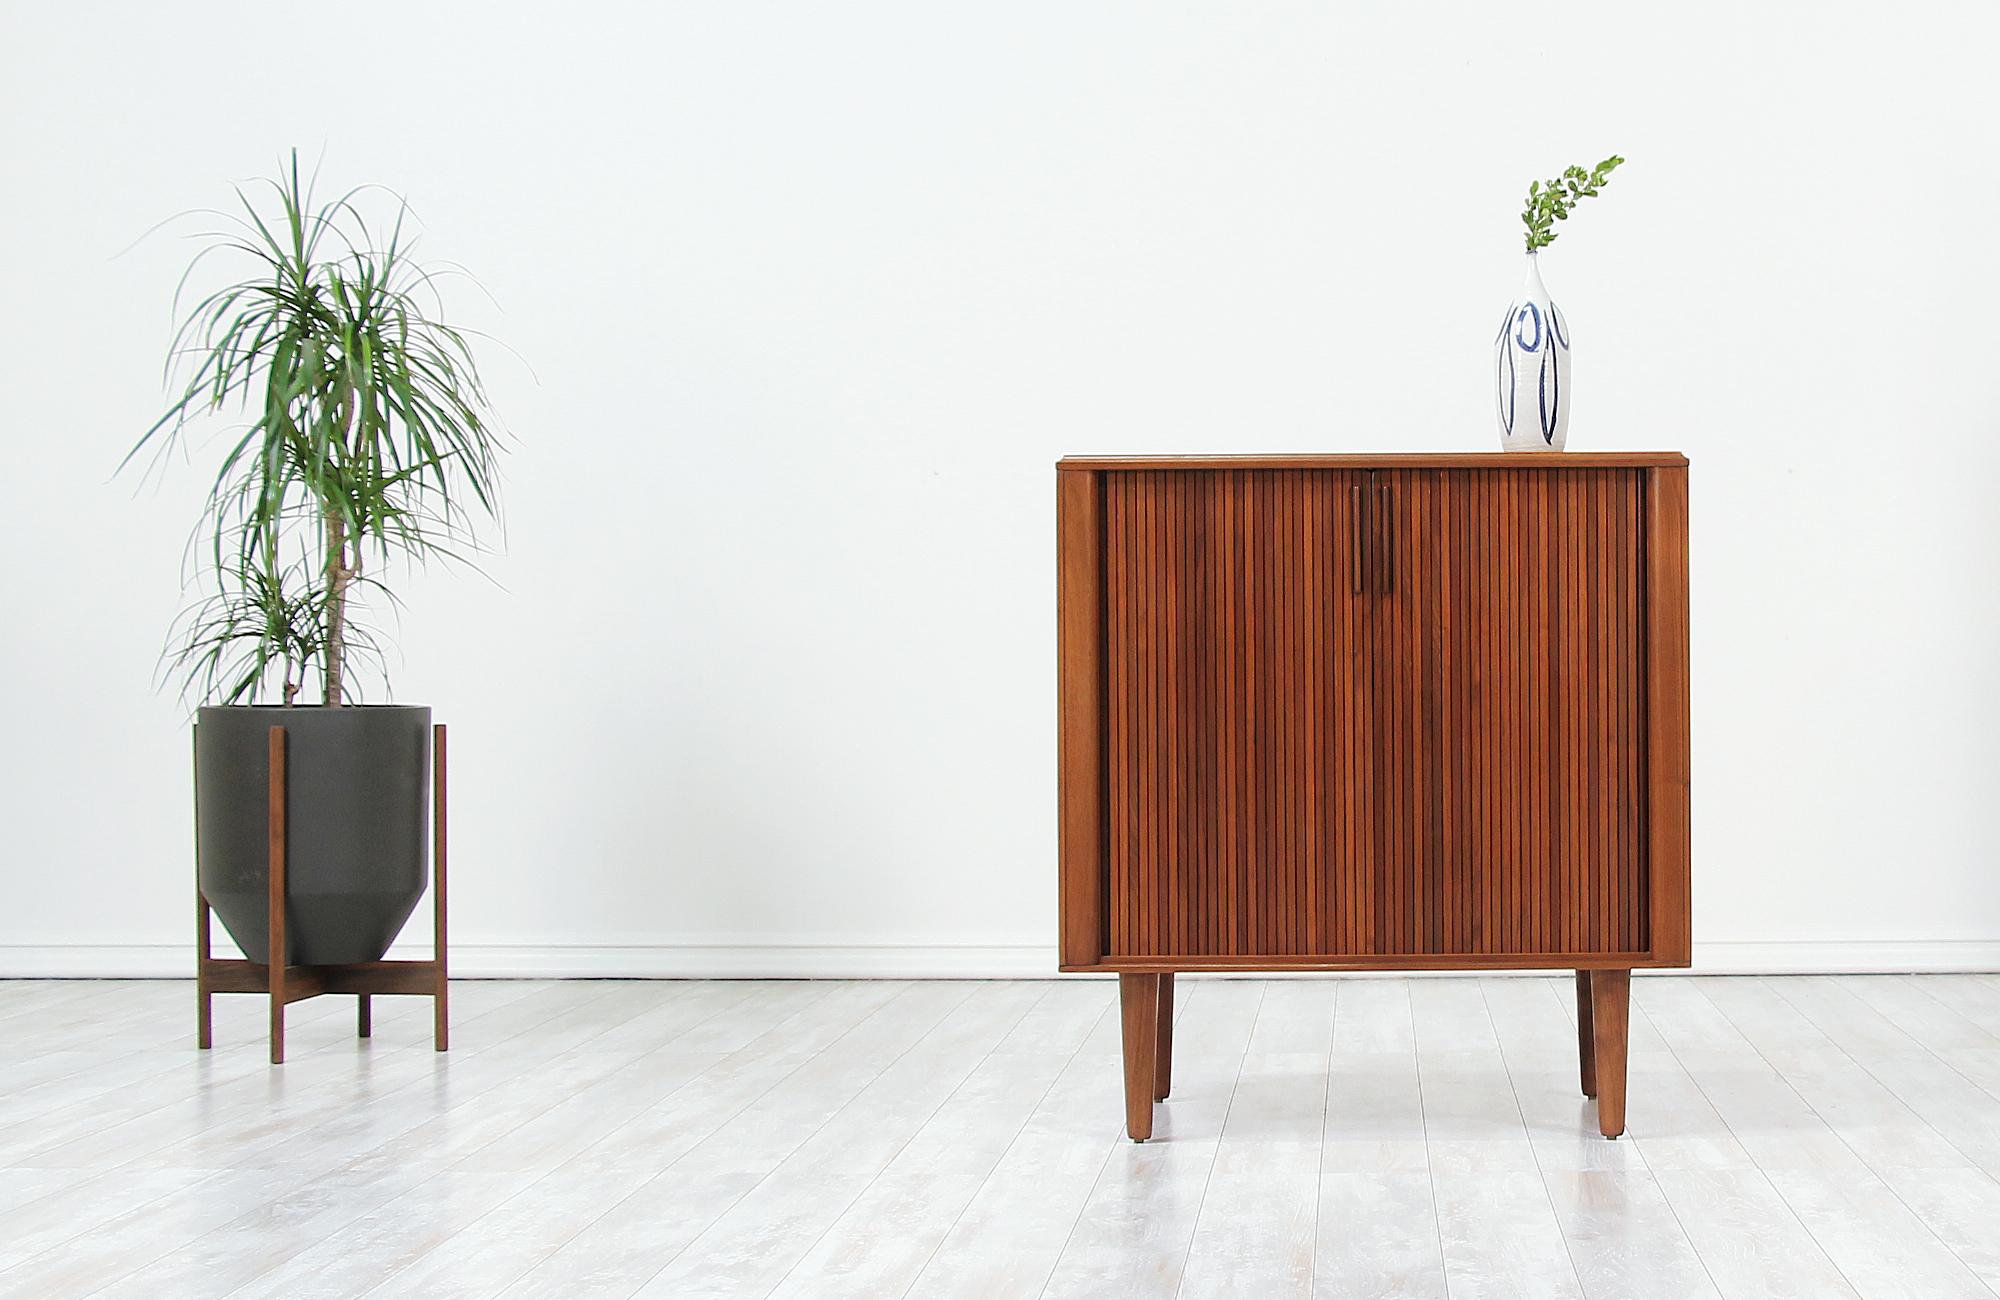 Minimalist vintage cabinet designed and manufactured in the United States by Barzilay circa 1960s. Low in profile and compact in size, this stylish cabinet features a sturdy walnut wood frame with two tambour doors and four tapered legs that